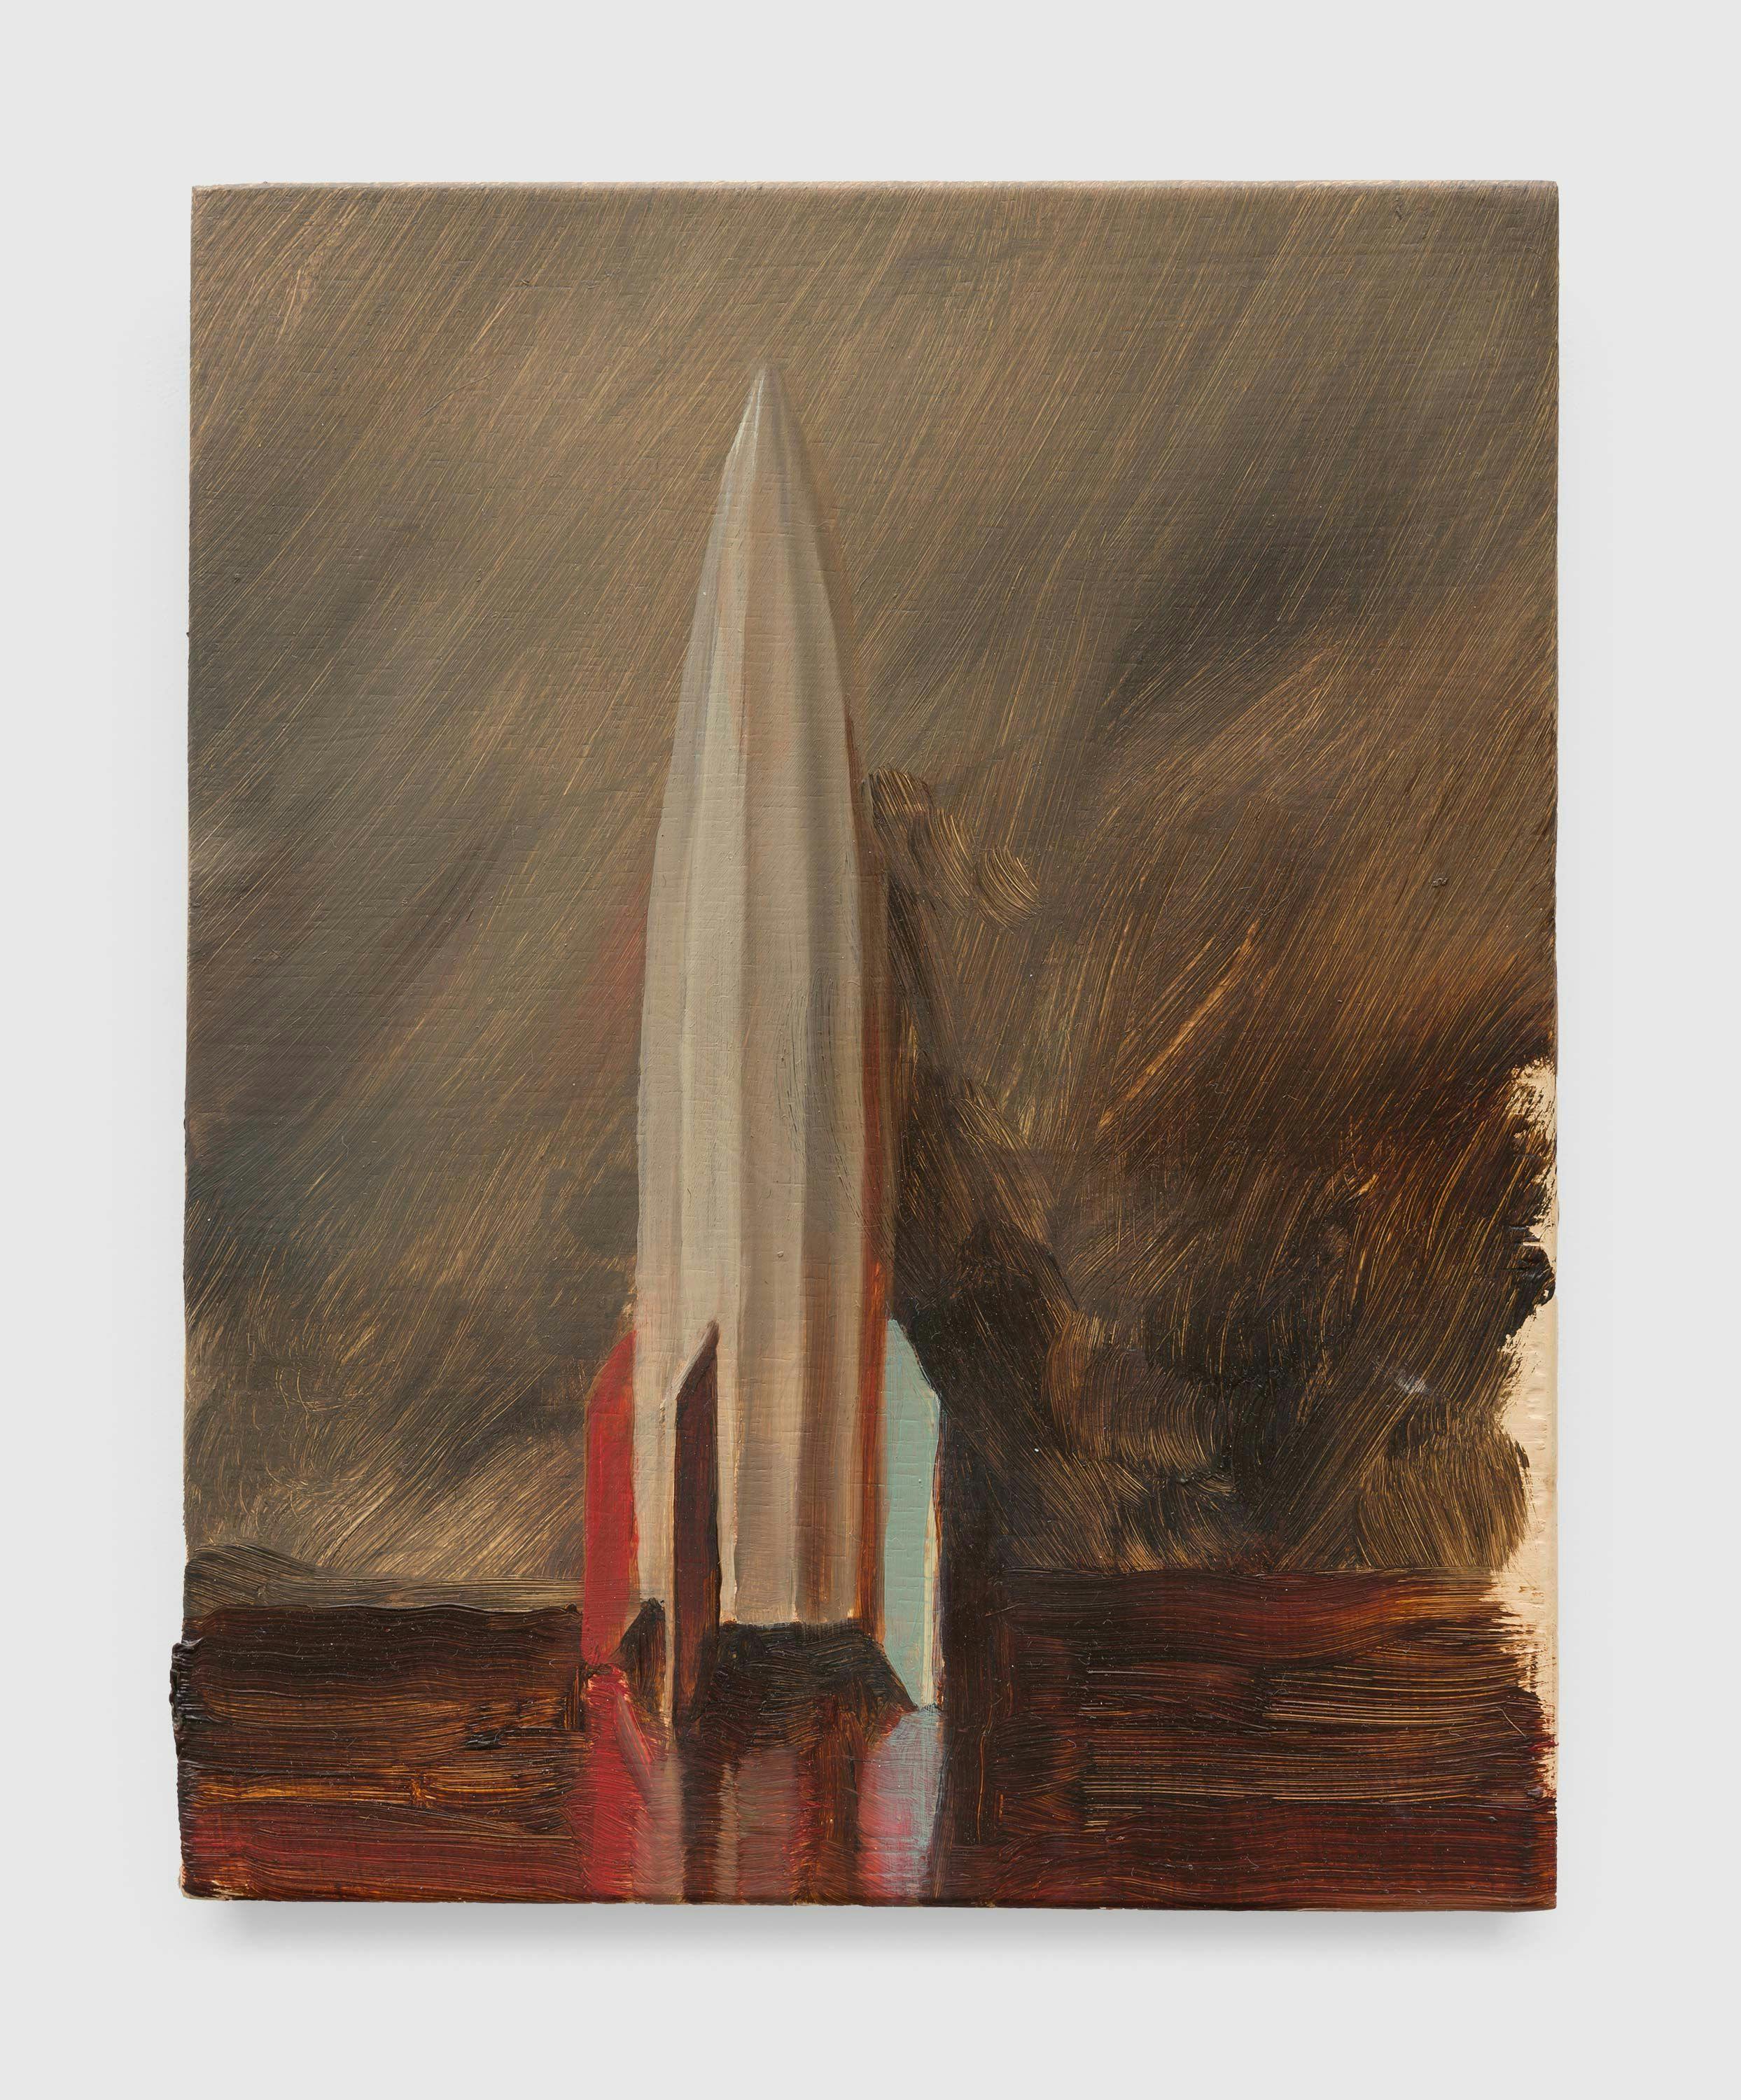 A painting by Michaël Borremans, titled Little Missile, dated 2020.